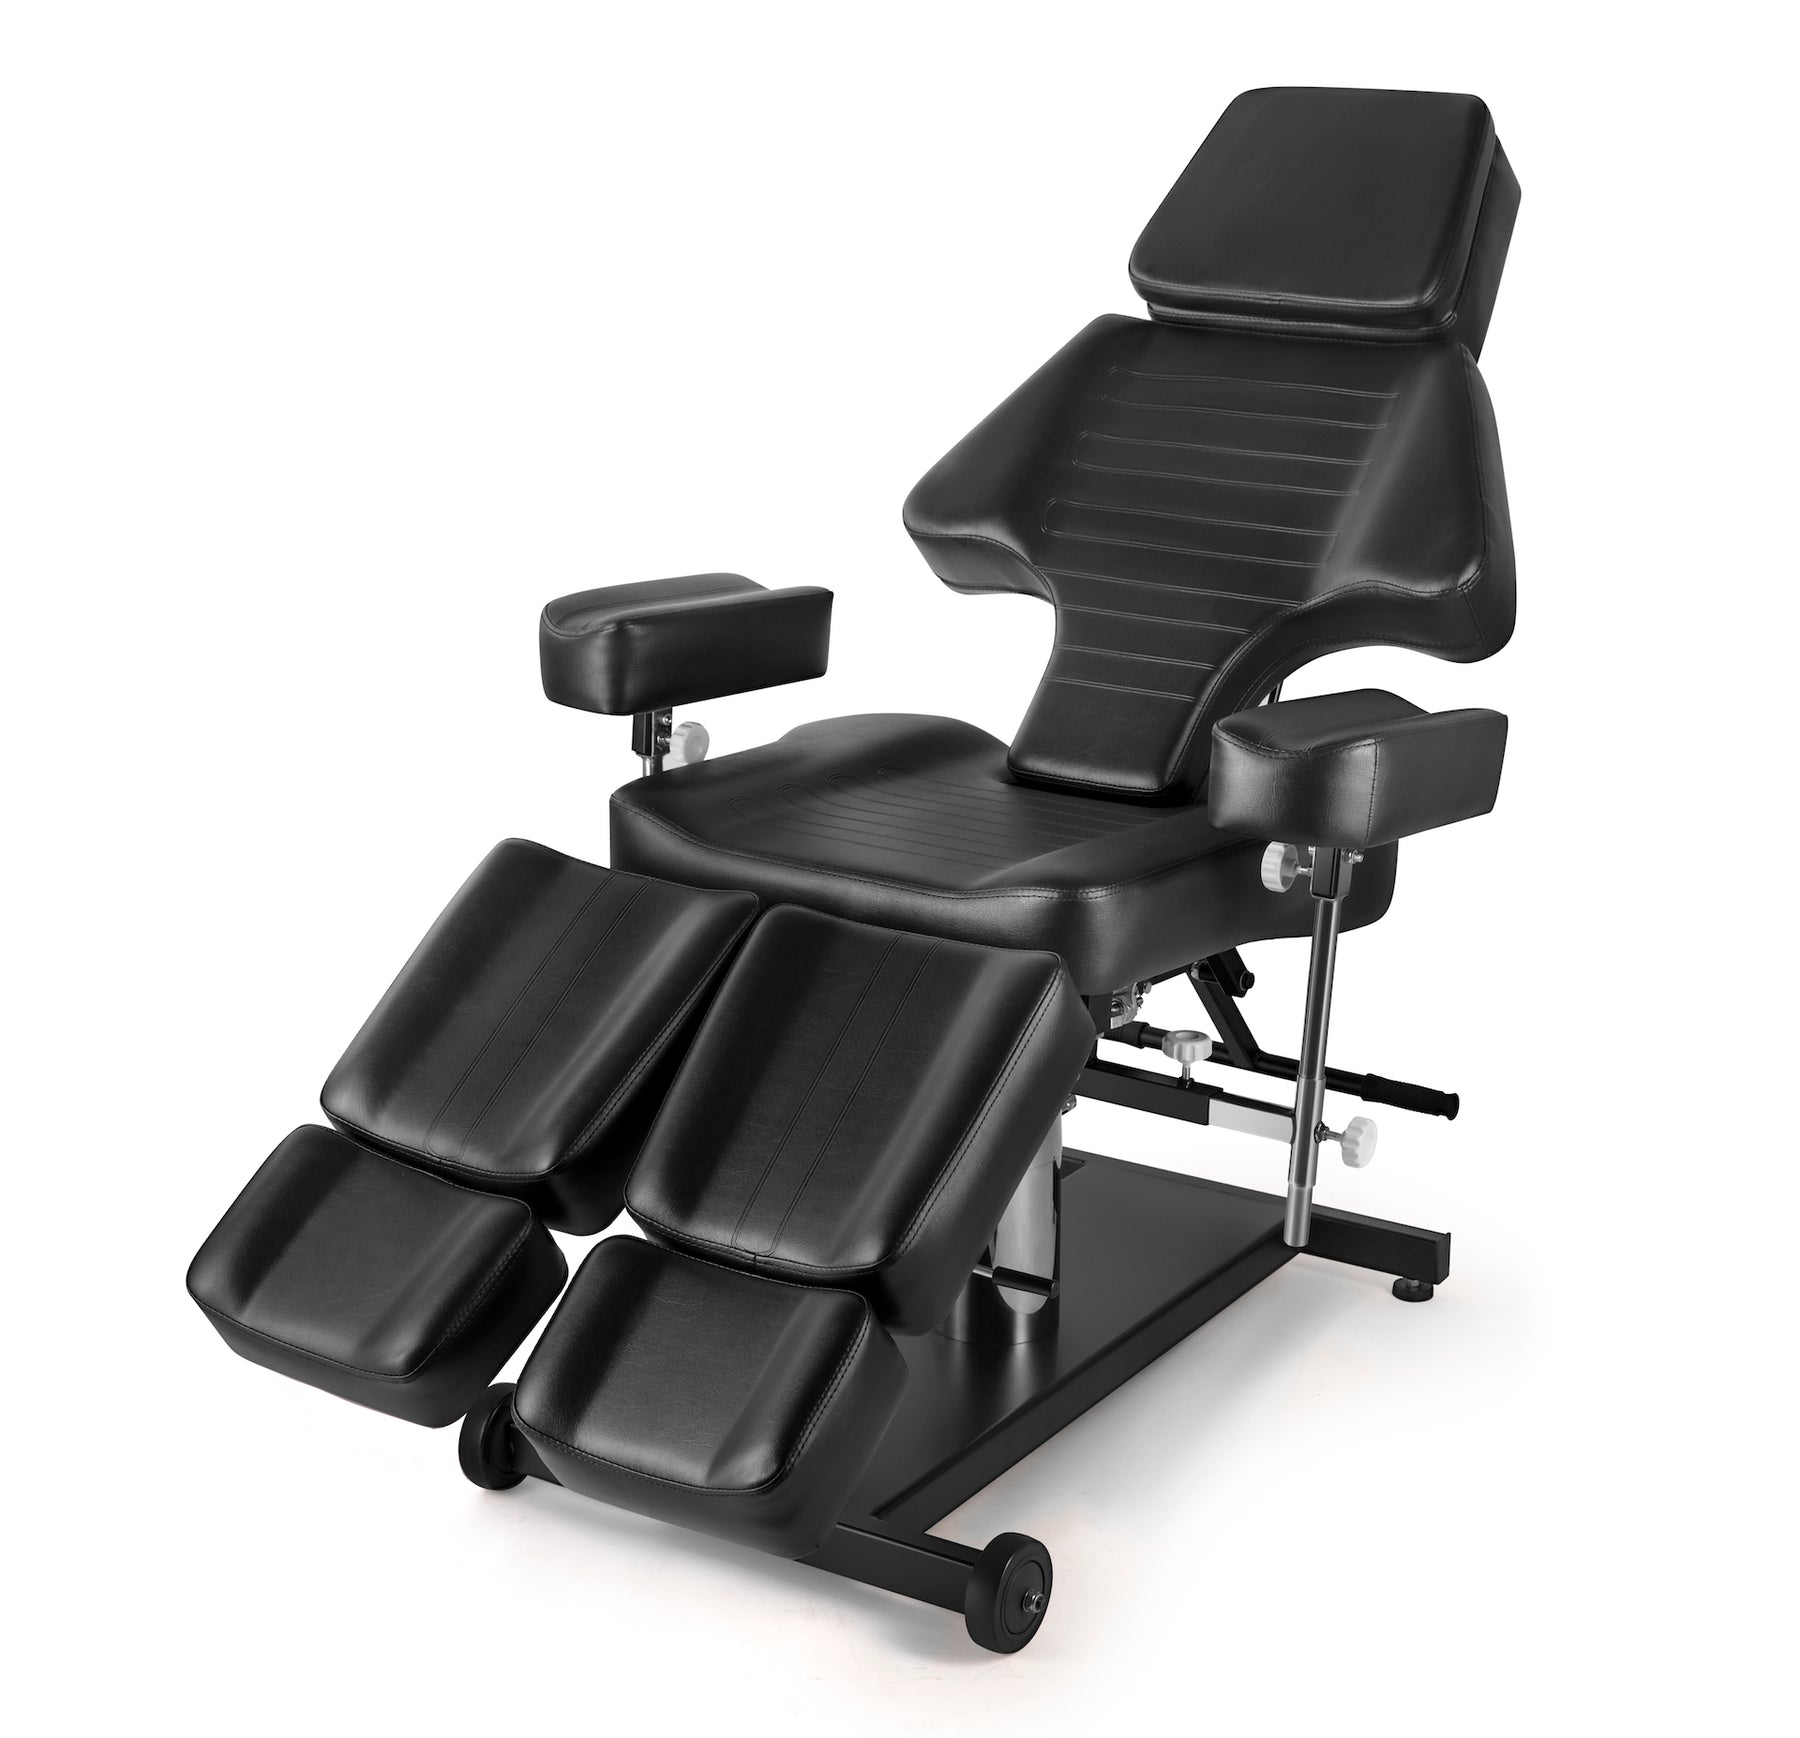 Wholesale 4 Motors Luxury Electric Beauty Facial Spa Chair Adjustable Tattoo  Massage Table Suppliers,Factory - Hicomedical.com